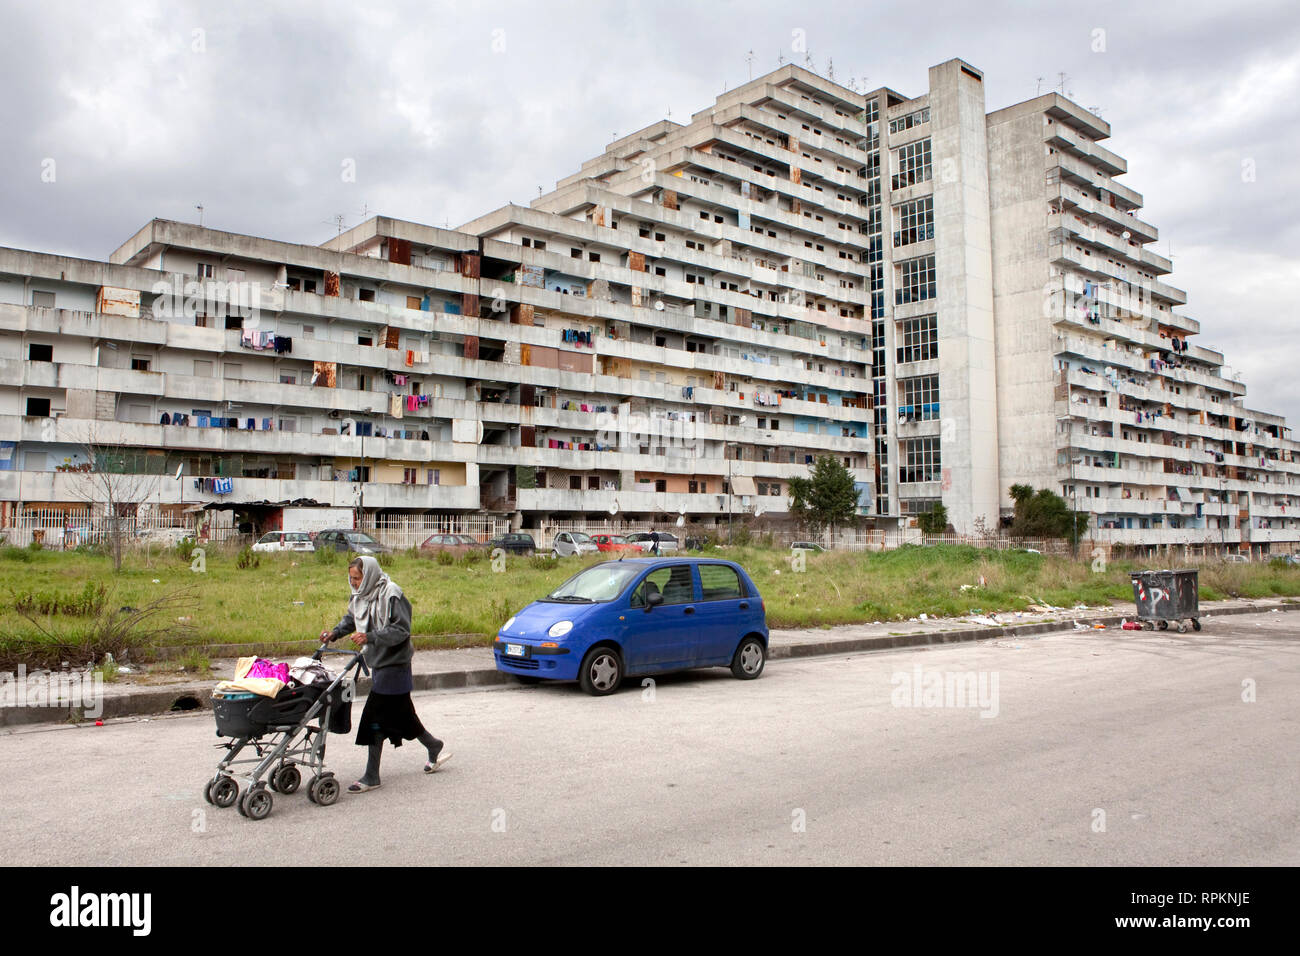 One of the appartment blocks known as  Le vele di Scampia in the North of Naples. The area has a bad reputation connected to the Camorra. Stock Photo